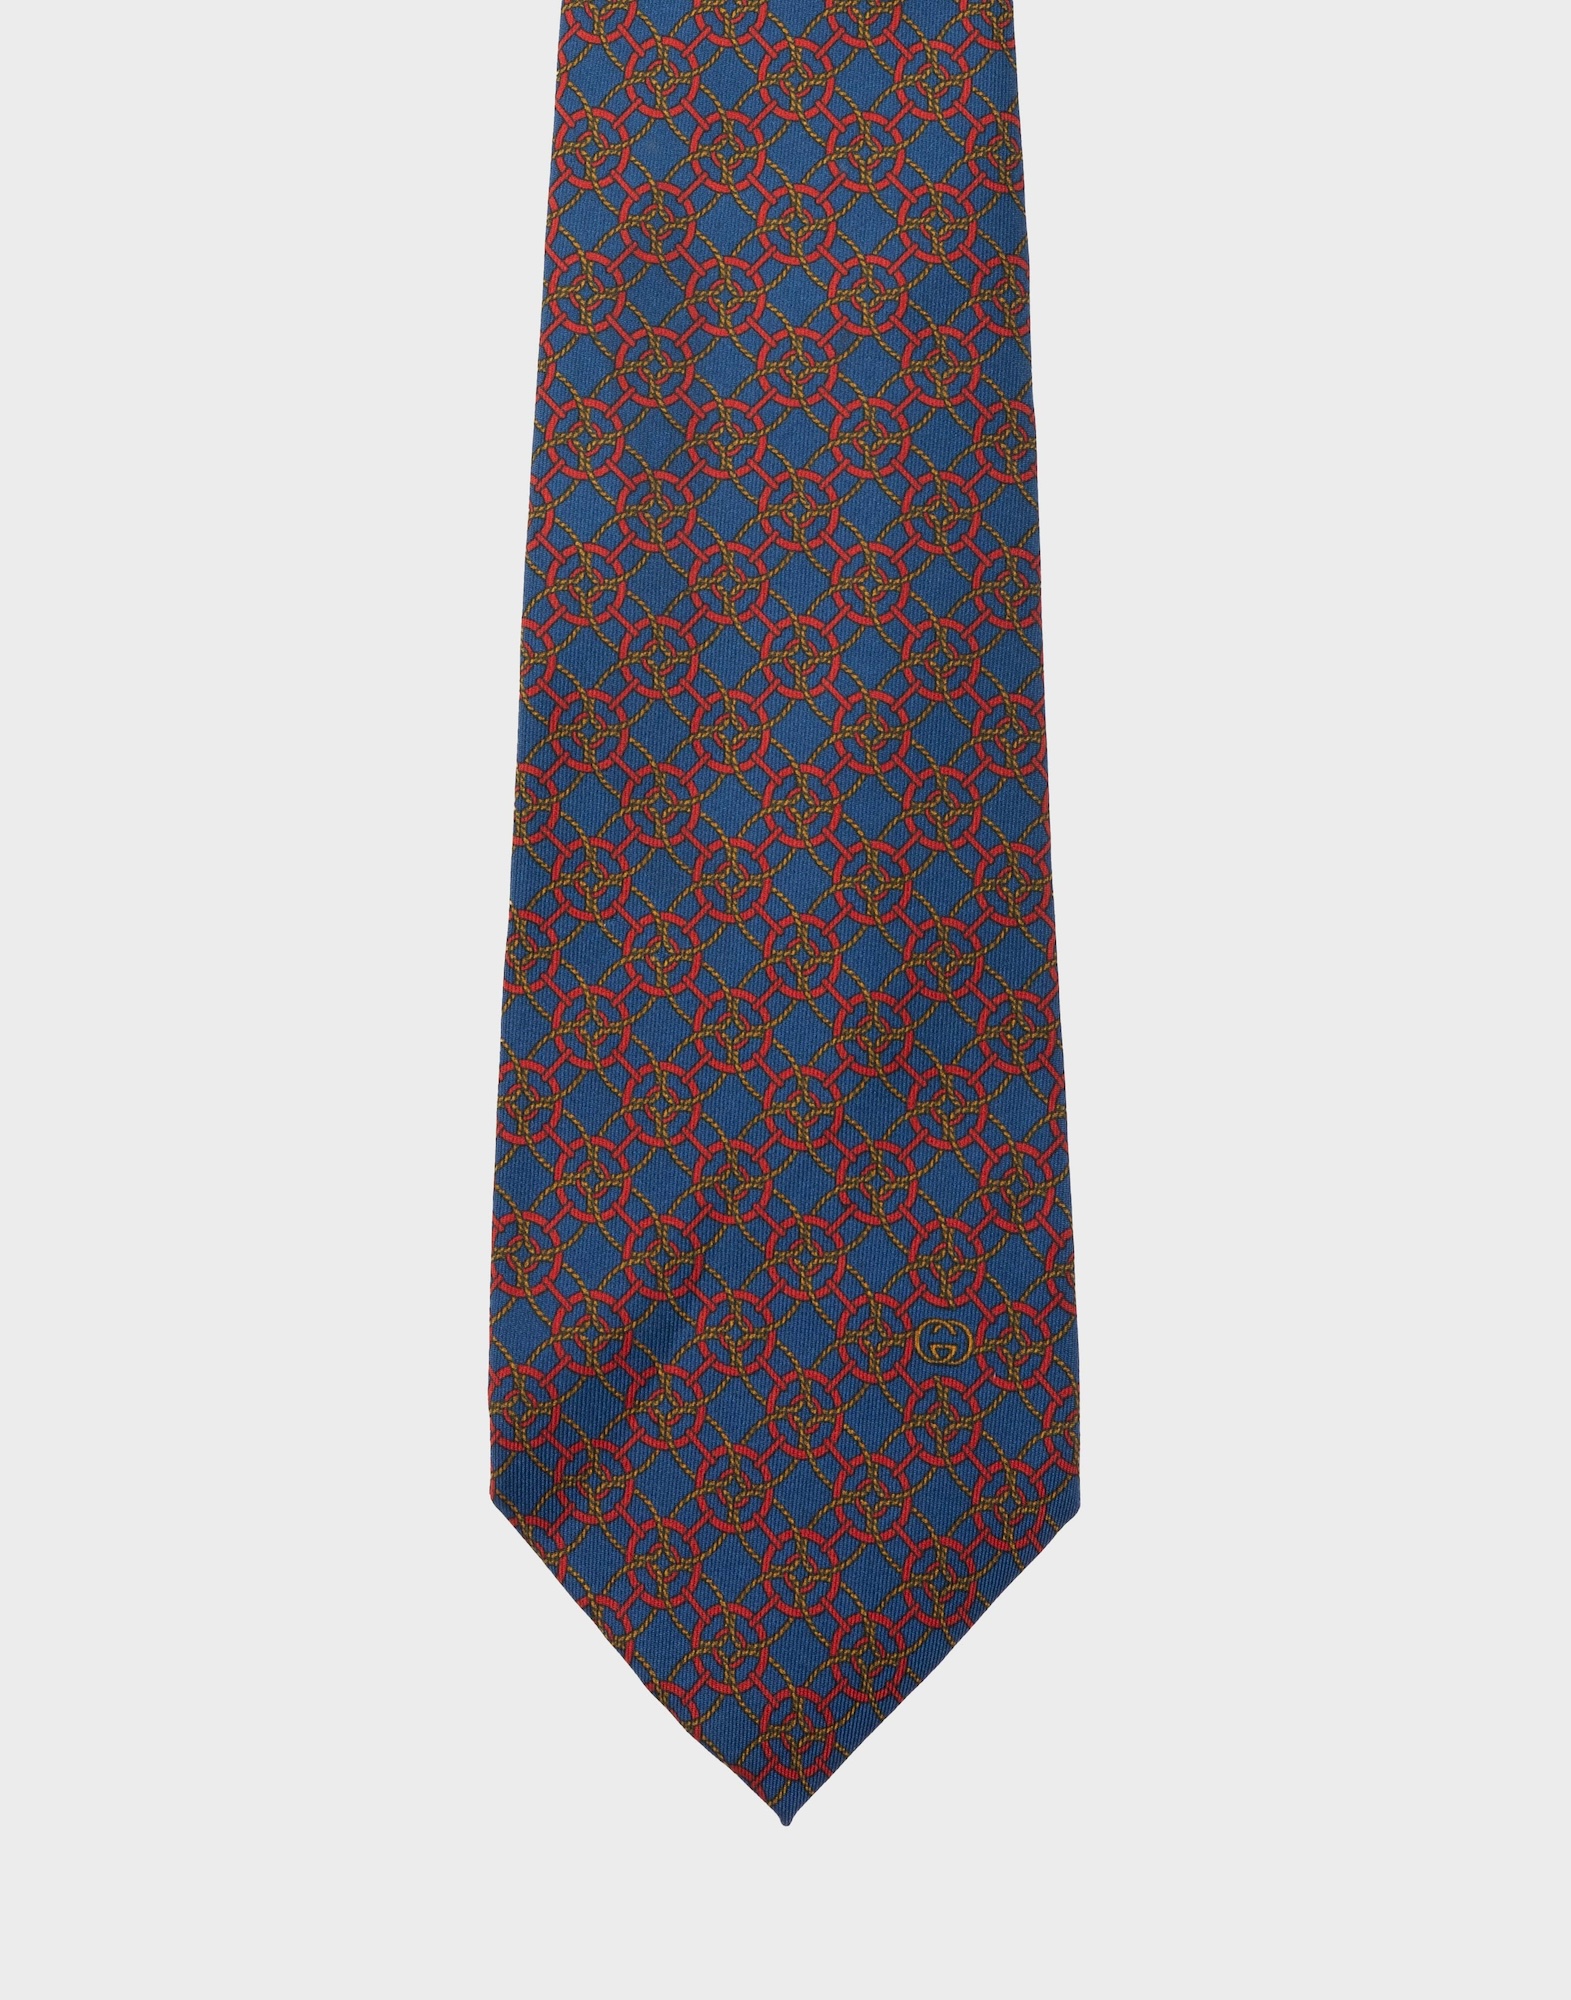 blue silk tie with red geometric pattern and gold-coloured braided cord